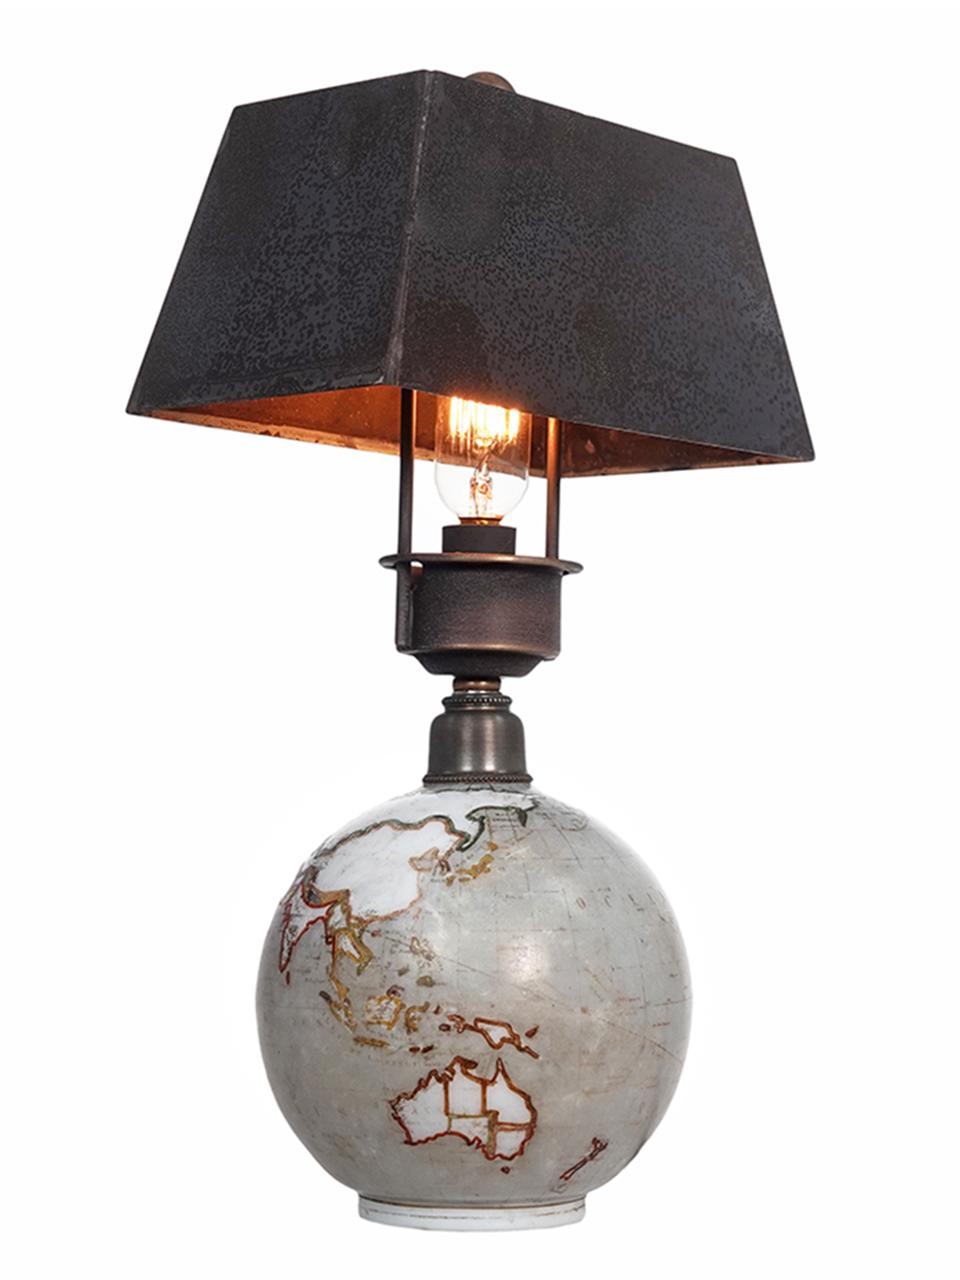 Super Rare Glass World Globe Boudoir Table Lamps, Pair In Good Condition For Sale In Peekskill, NY